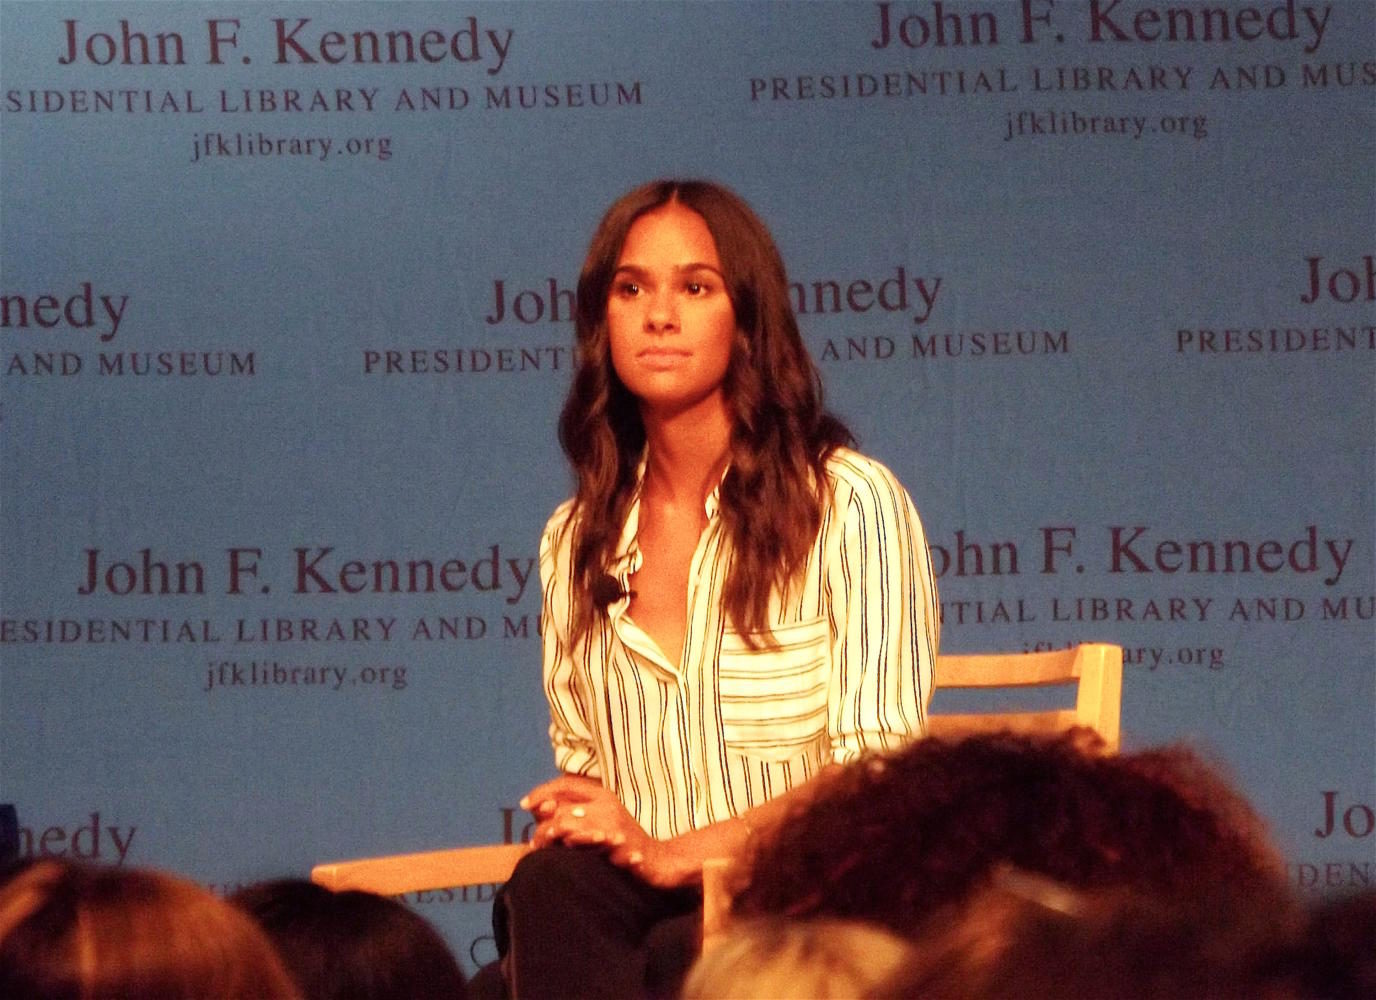 Misty+Copeland%2C+principal+dancer+for+the+American+Ballet+Theatre%2C+listens+to+a+question+from+the+audience+at+the+John+F.+Kennedy+Presidential+Library+and+Museum+on+Aug.+28%2C+2017.